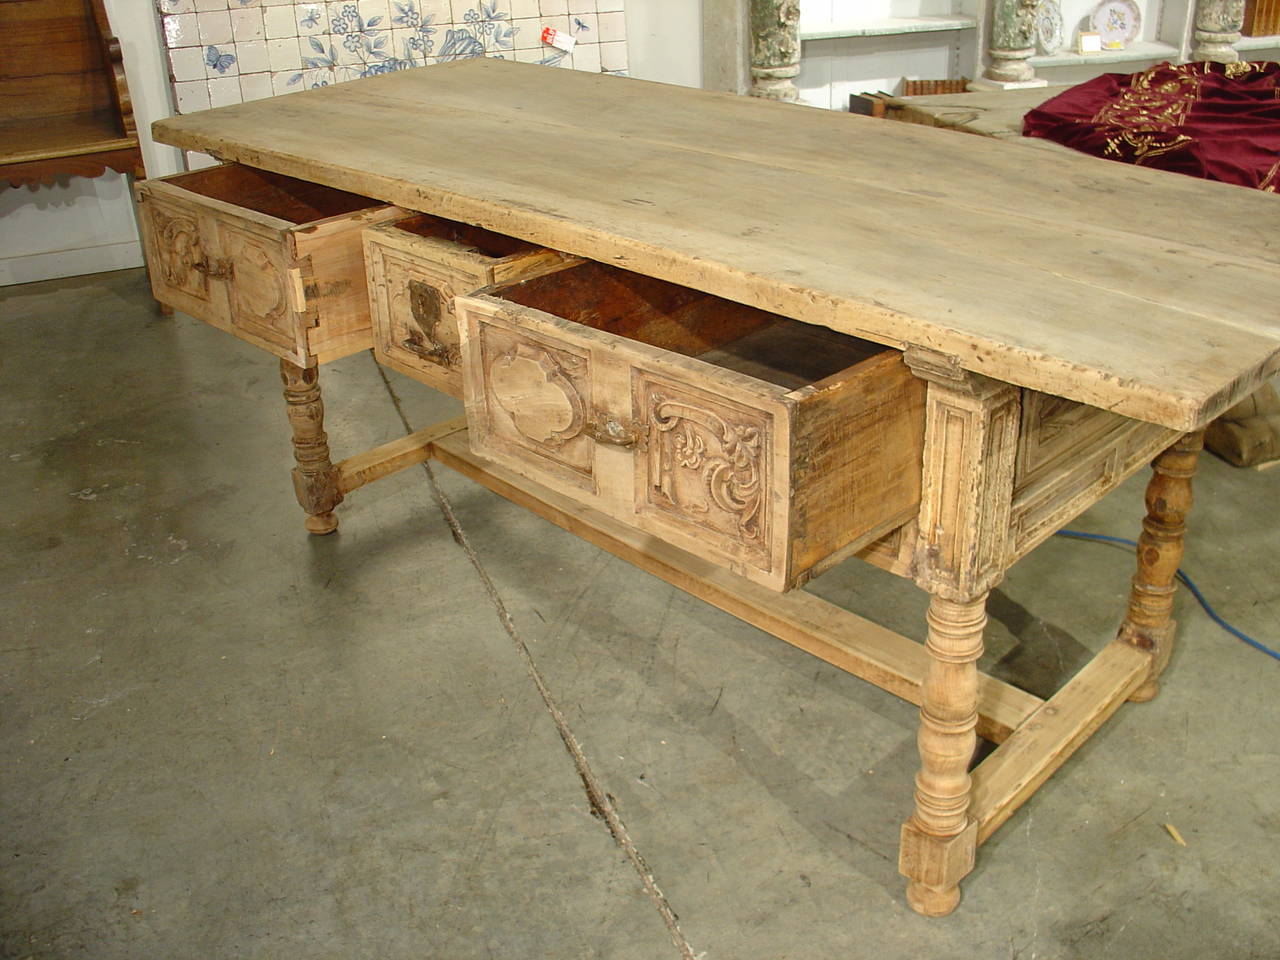 Carved 18th Century Stripped Walnut Wood Table from Italy